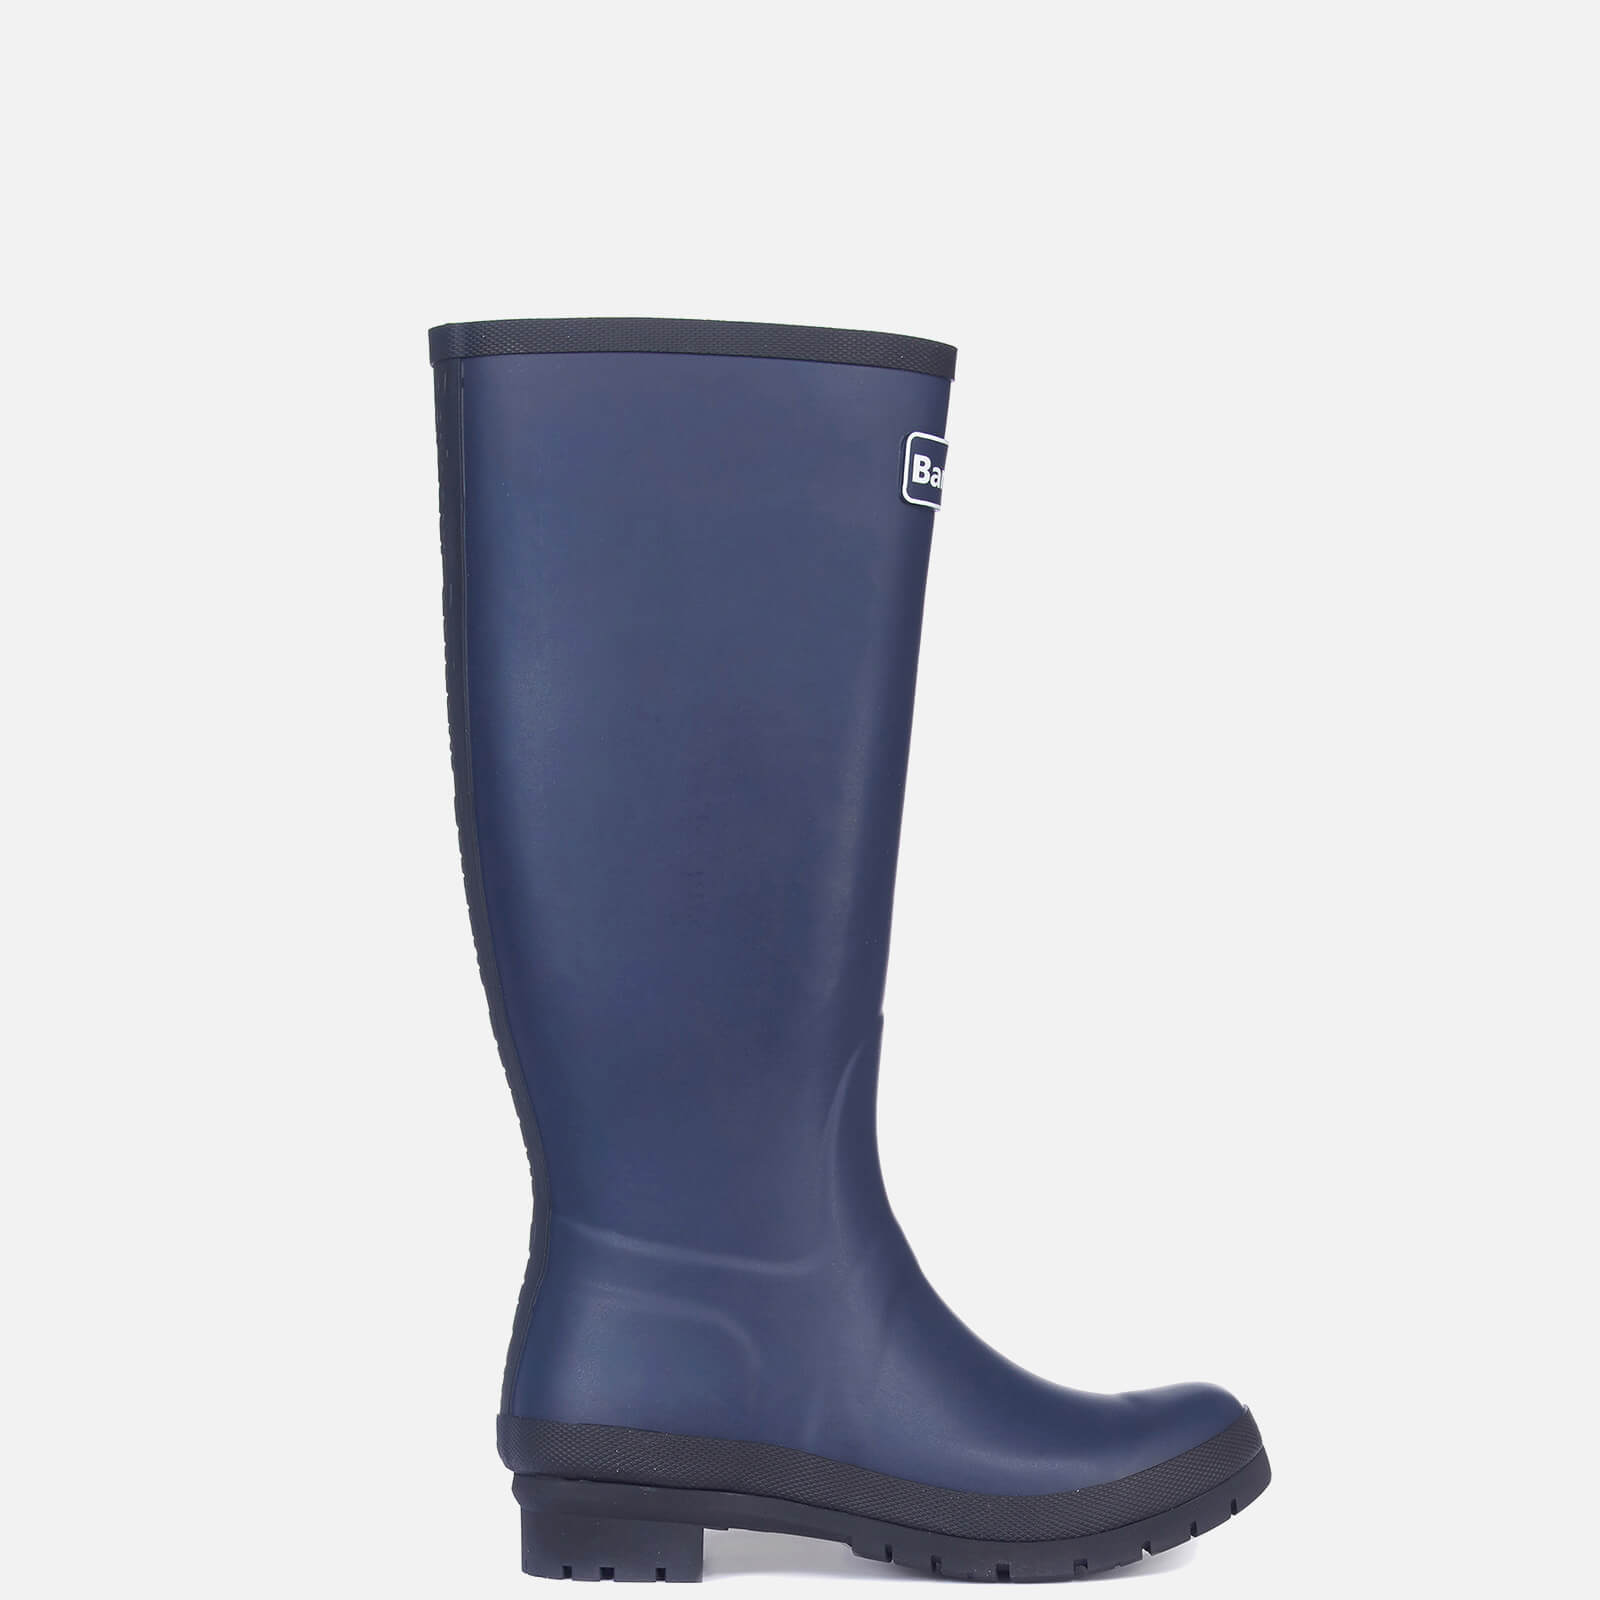 Barbour Women's Abbey Tall Wellies - Navy - UK 4